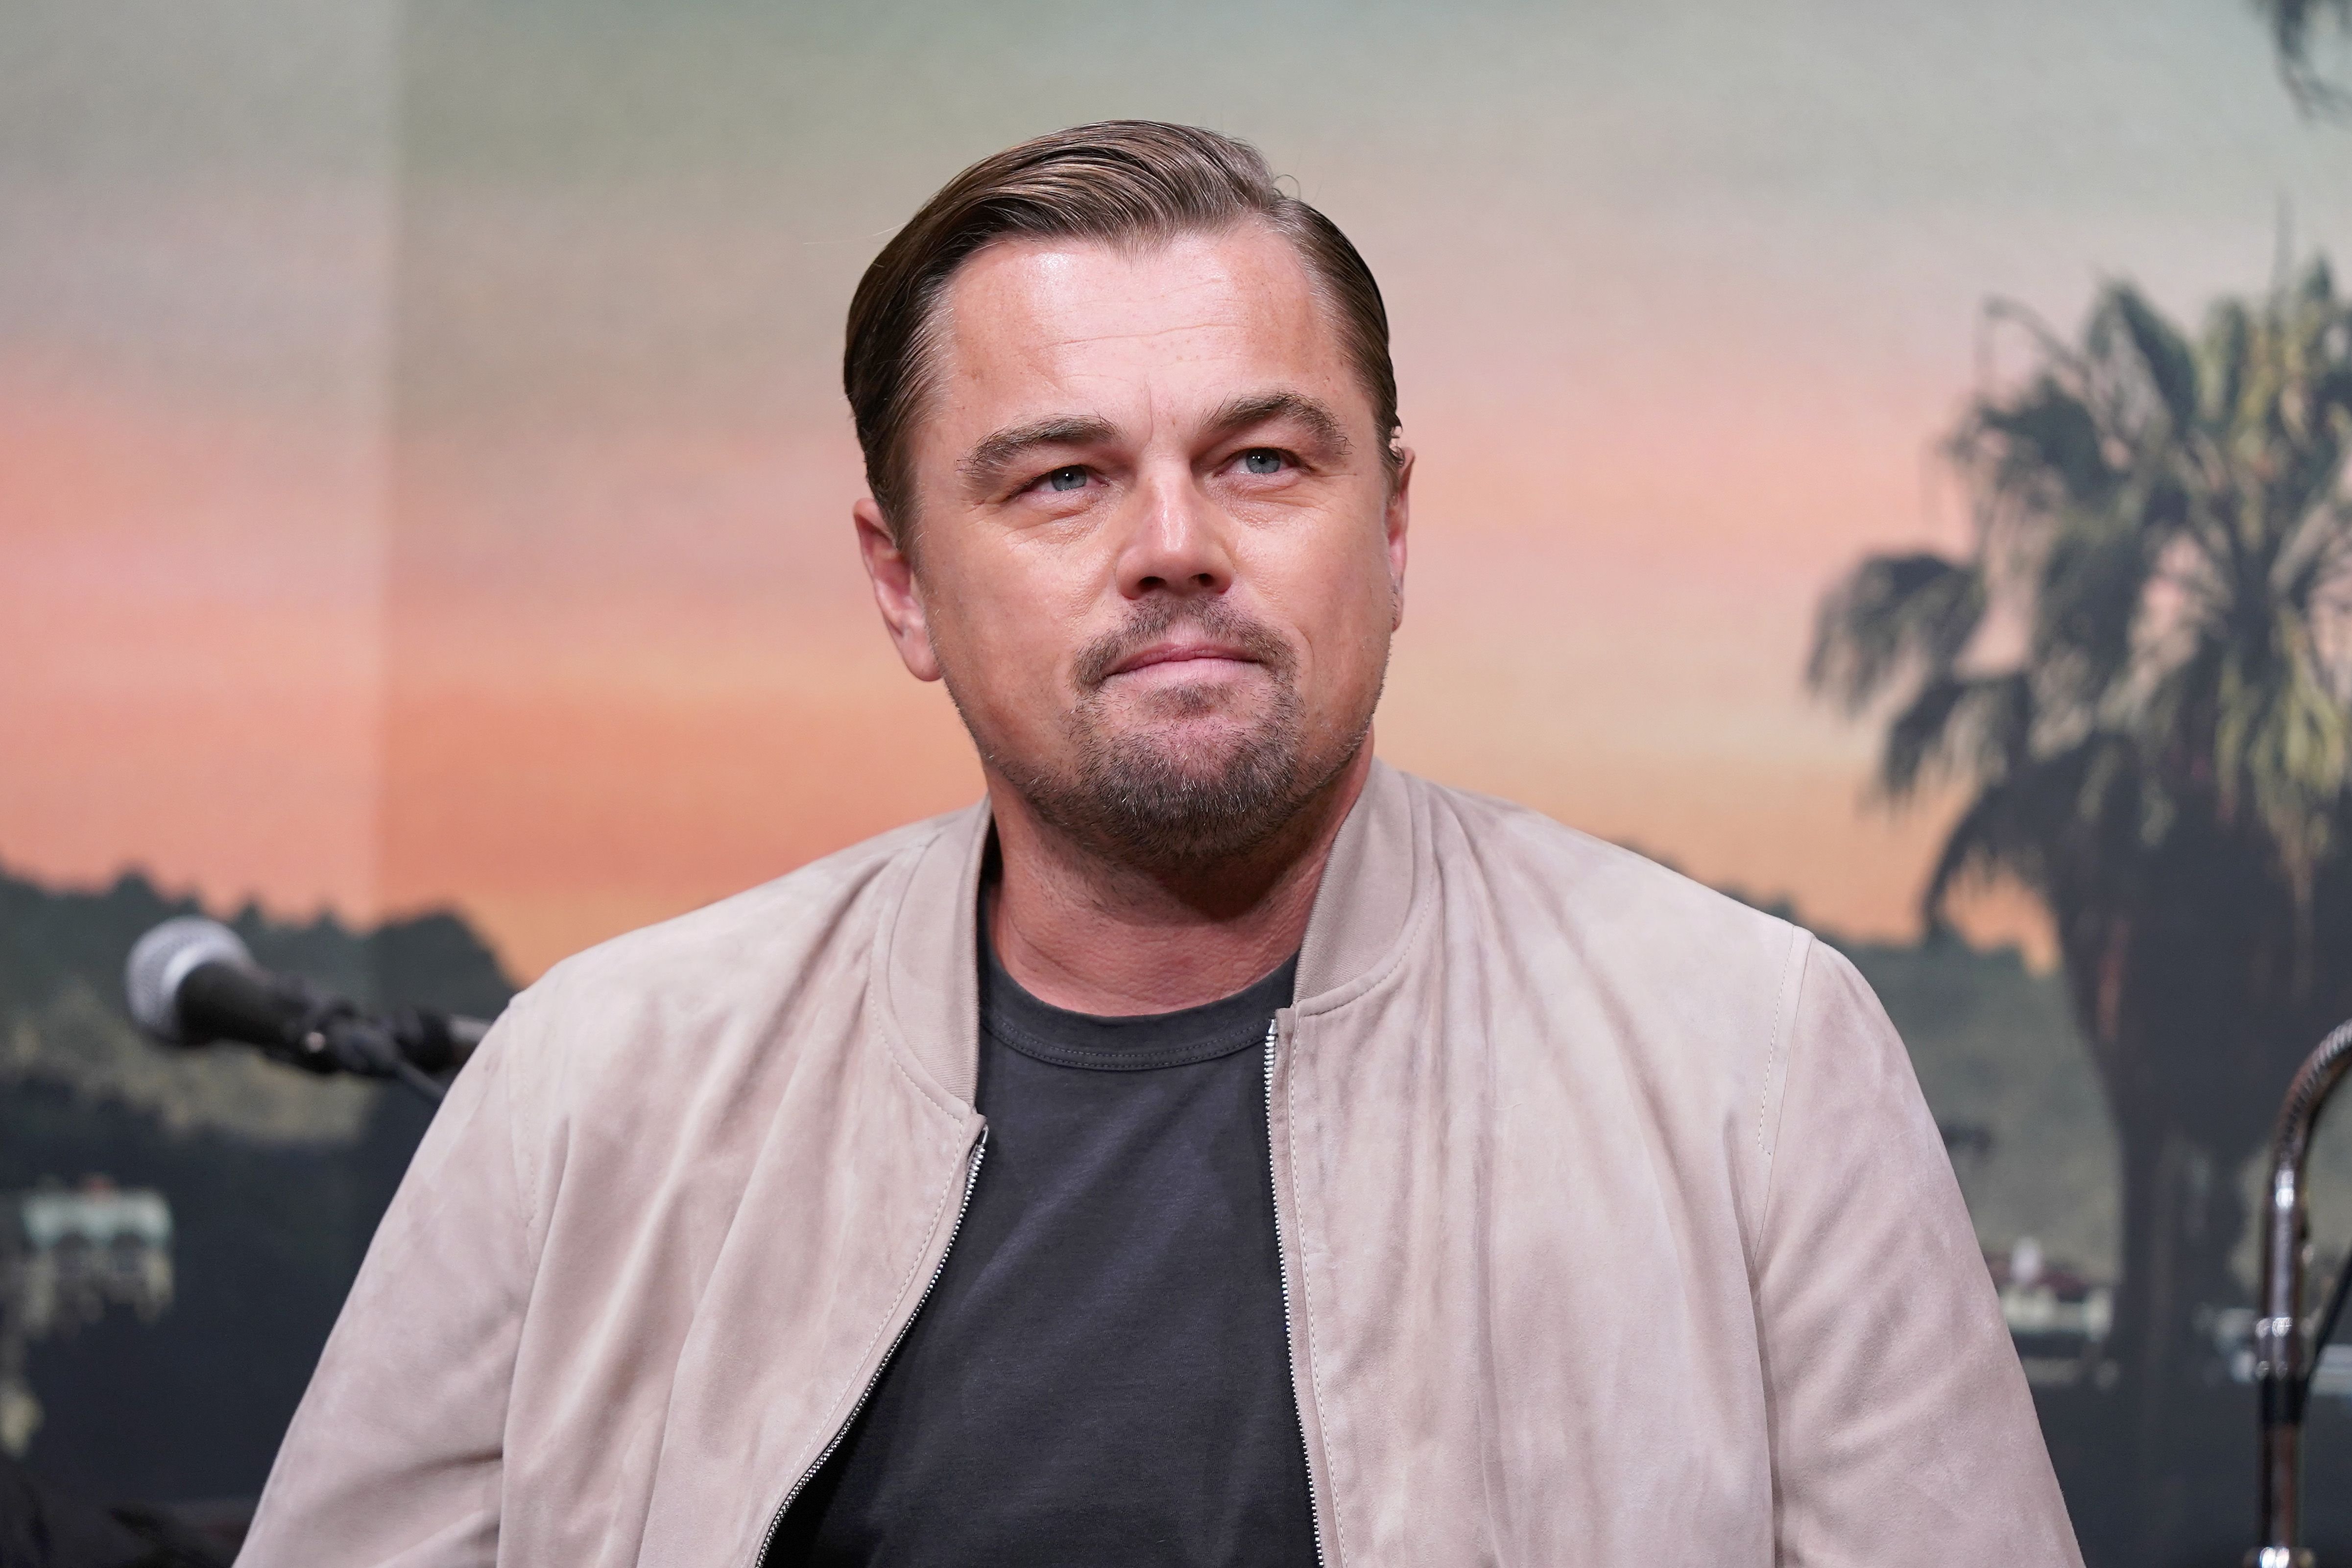 Leonardo DiCaprio at the Japanese premiere of 'Once Upon A Time In Hollywood' in 2019 in Tokyo | Source: 